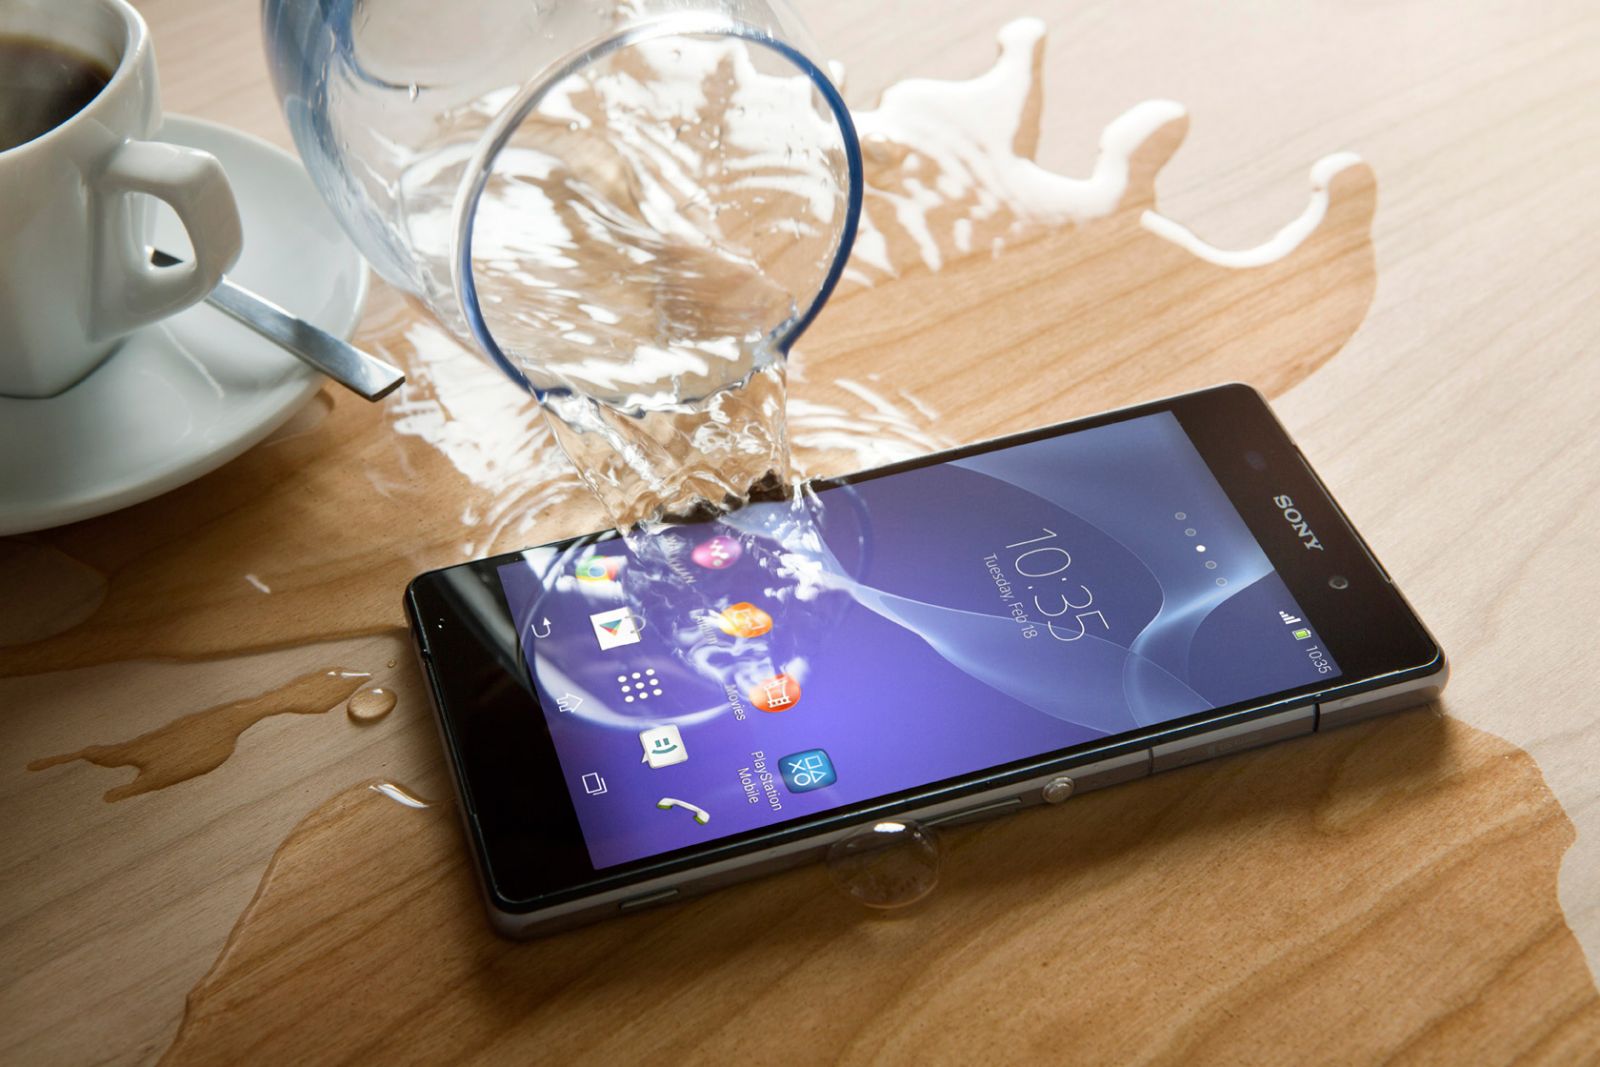 Sony Xperia Z2 mobile and tablet to hit UAE by April 17